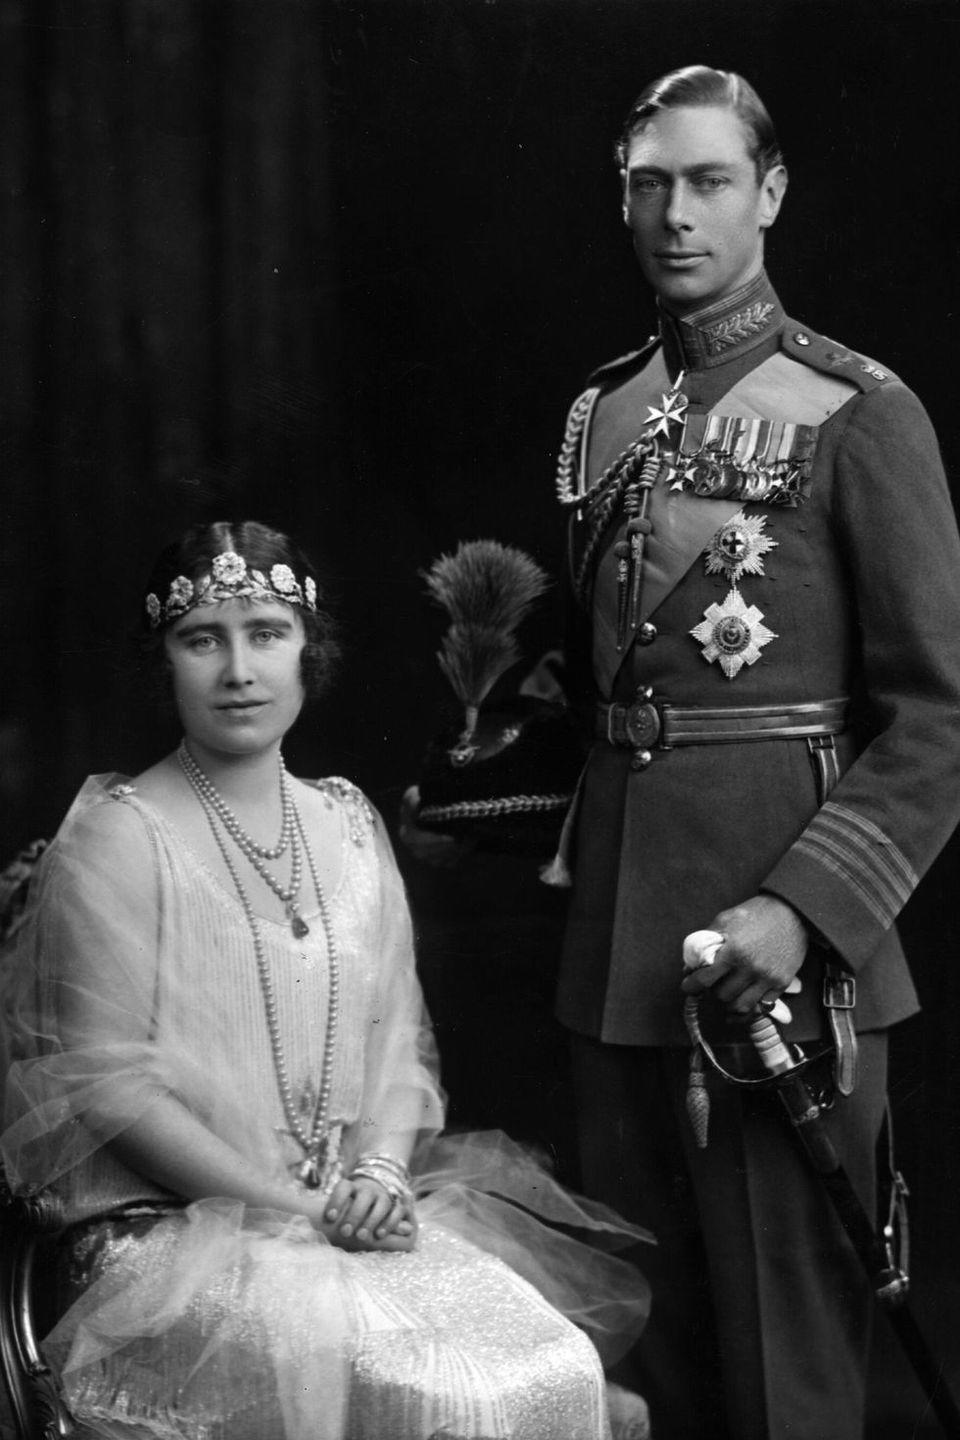 <p><strong>Wedding date: </strong>April 26, 1923 </p><p><strong>Wedding tiara: </strong>For her bridal portraits, Queen Elizabeth's mother wore the Strathmore tiara, which was a wedding gift from her father, the Earl of Strathmore. The tiara likely dates back to the late nineteenth century, and it features a garland of roses set with rose-cut diamonds. </p>